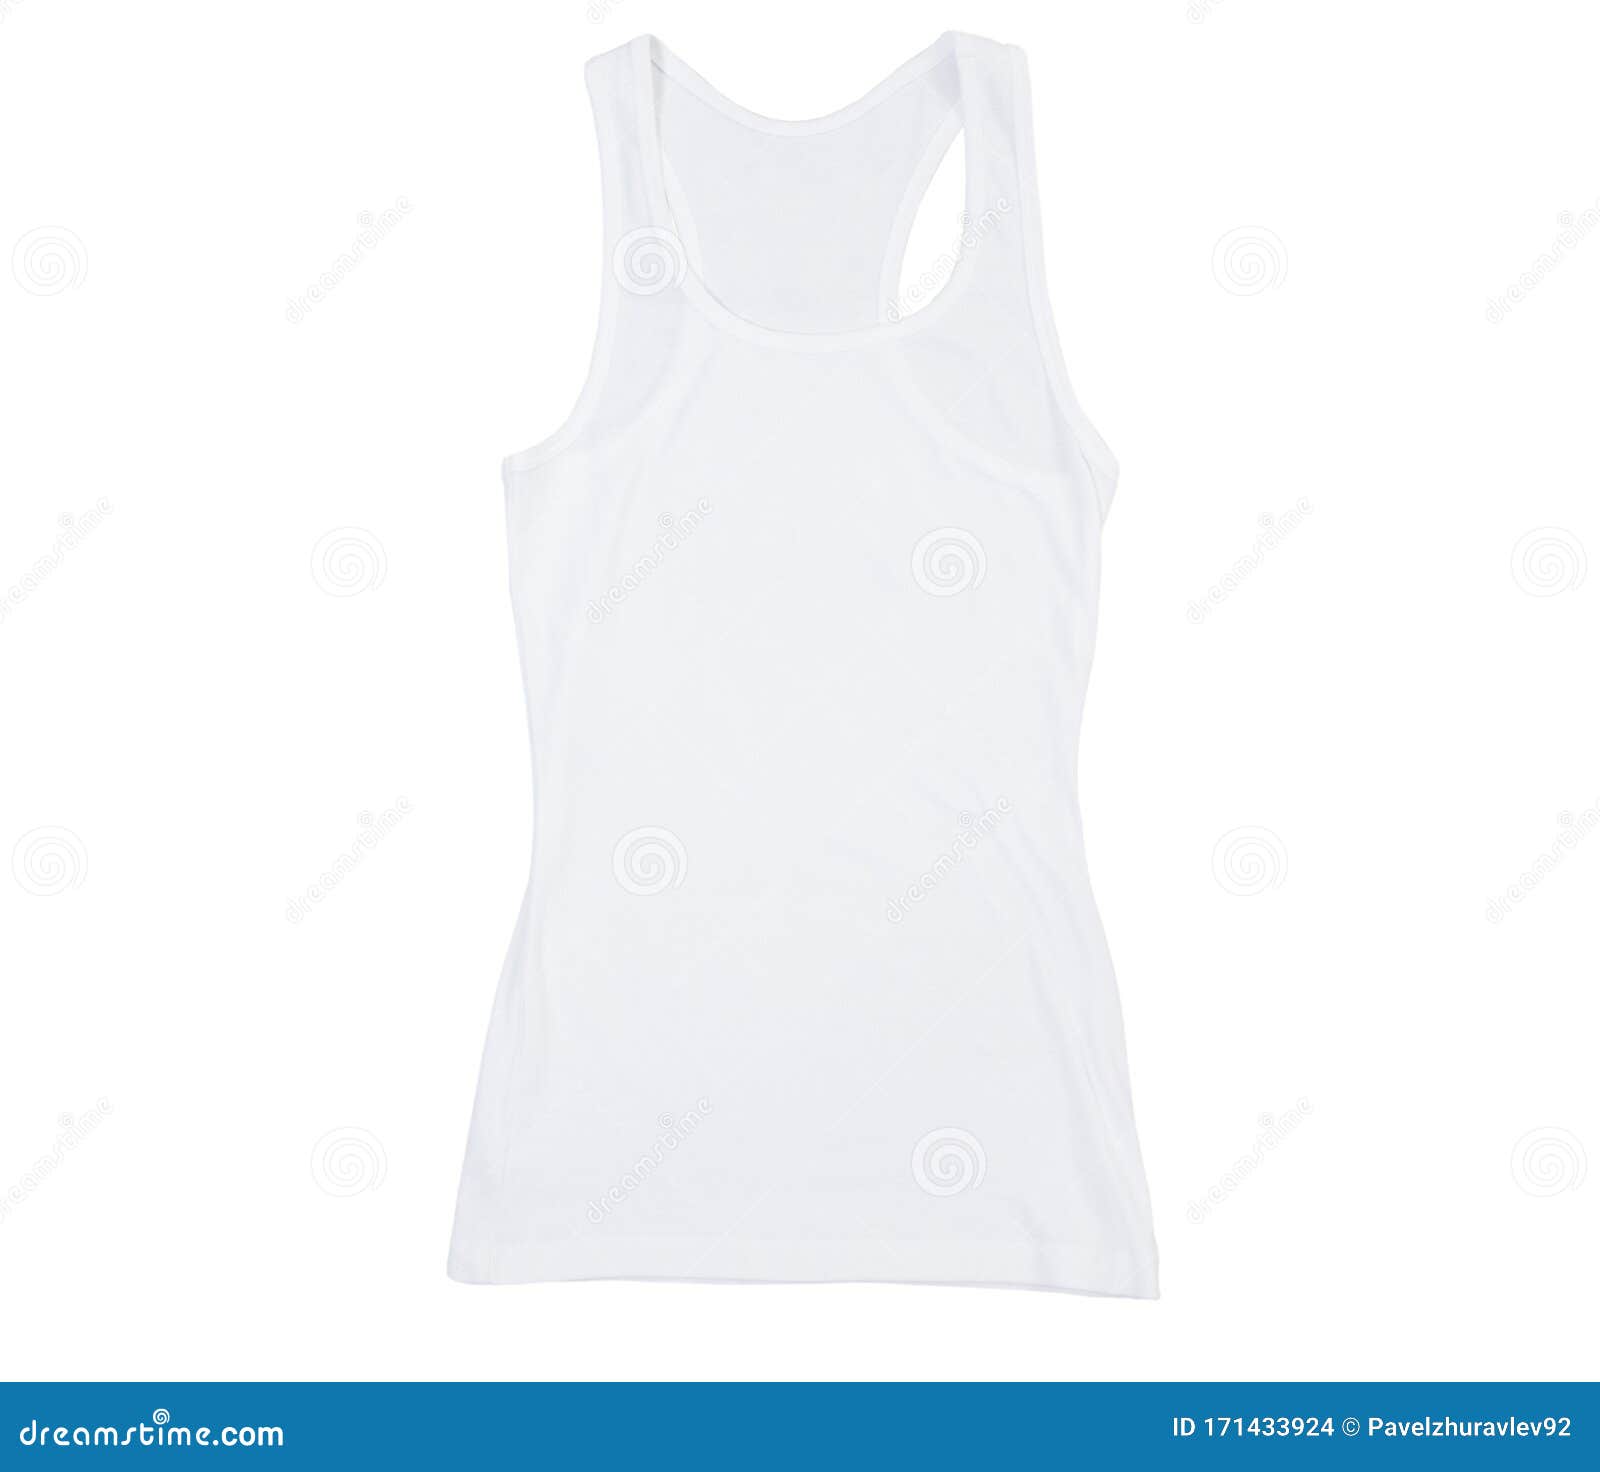 Download White Tank Top Mock Up Plain Hollow Female Tank Top Shirt Isolated On White Background Plain Hollow Female Tank Top Shirt Stock Photo Image Of Sale Design 171433924